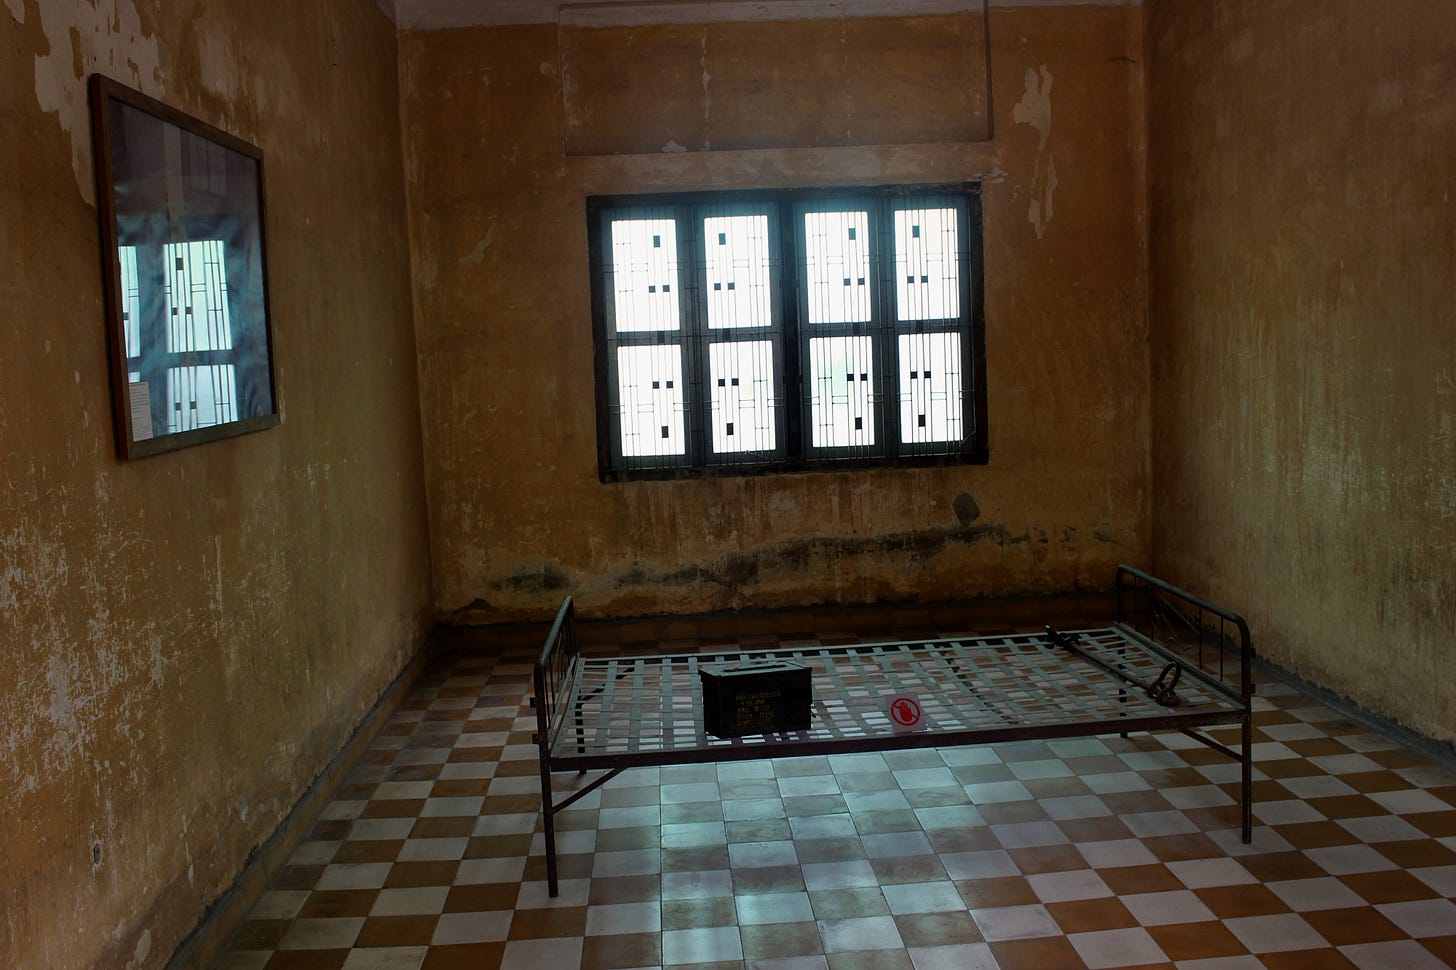 A room where the walls and floor are faded and worn. There is a single bedframe in the center of the room, as well as a single mirror and some windows.